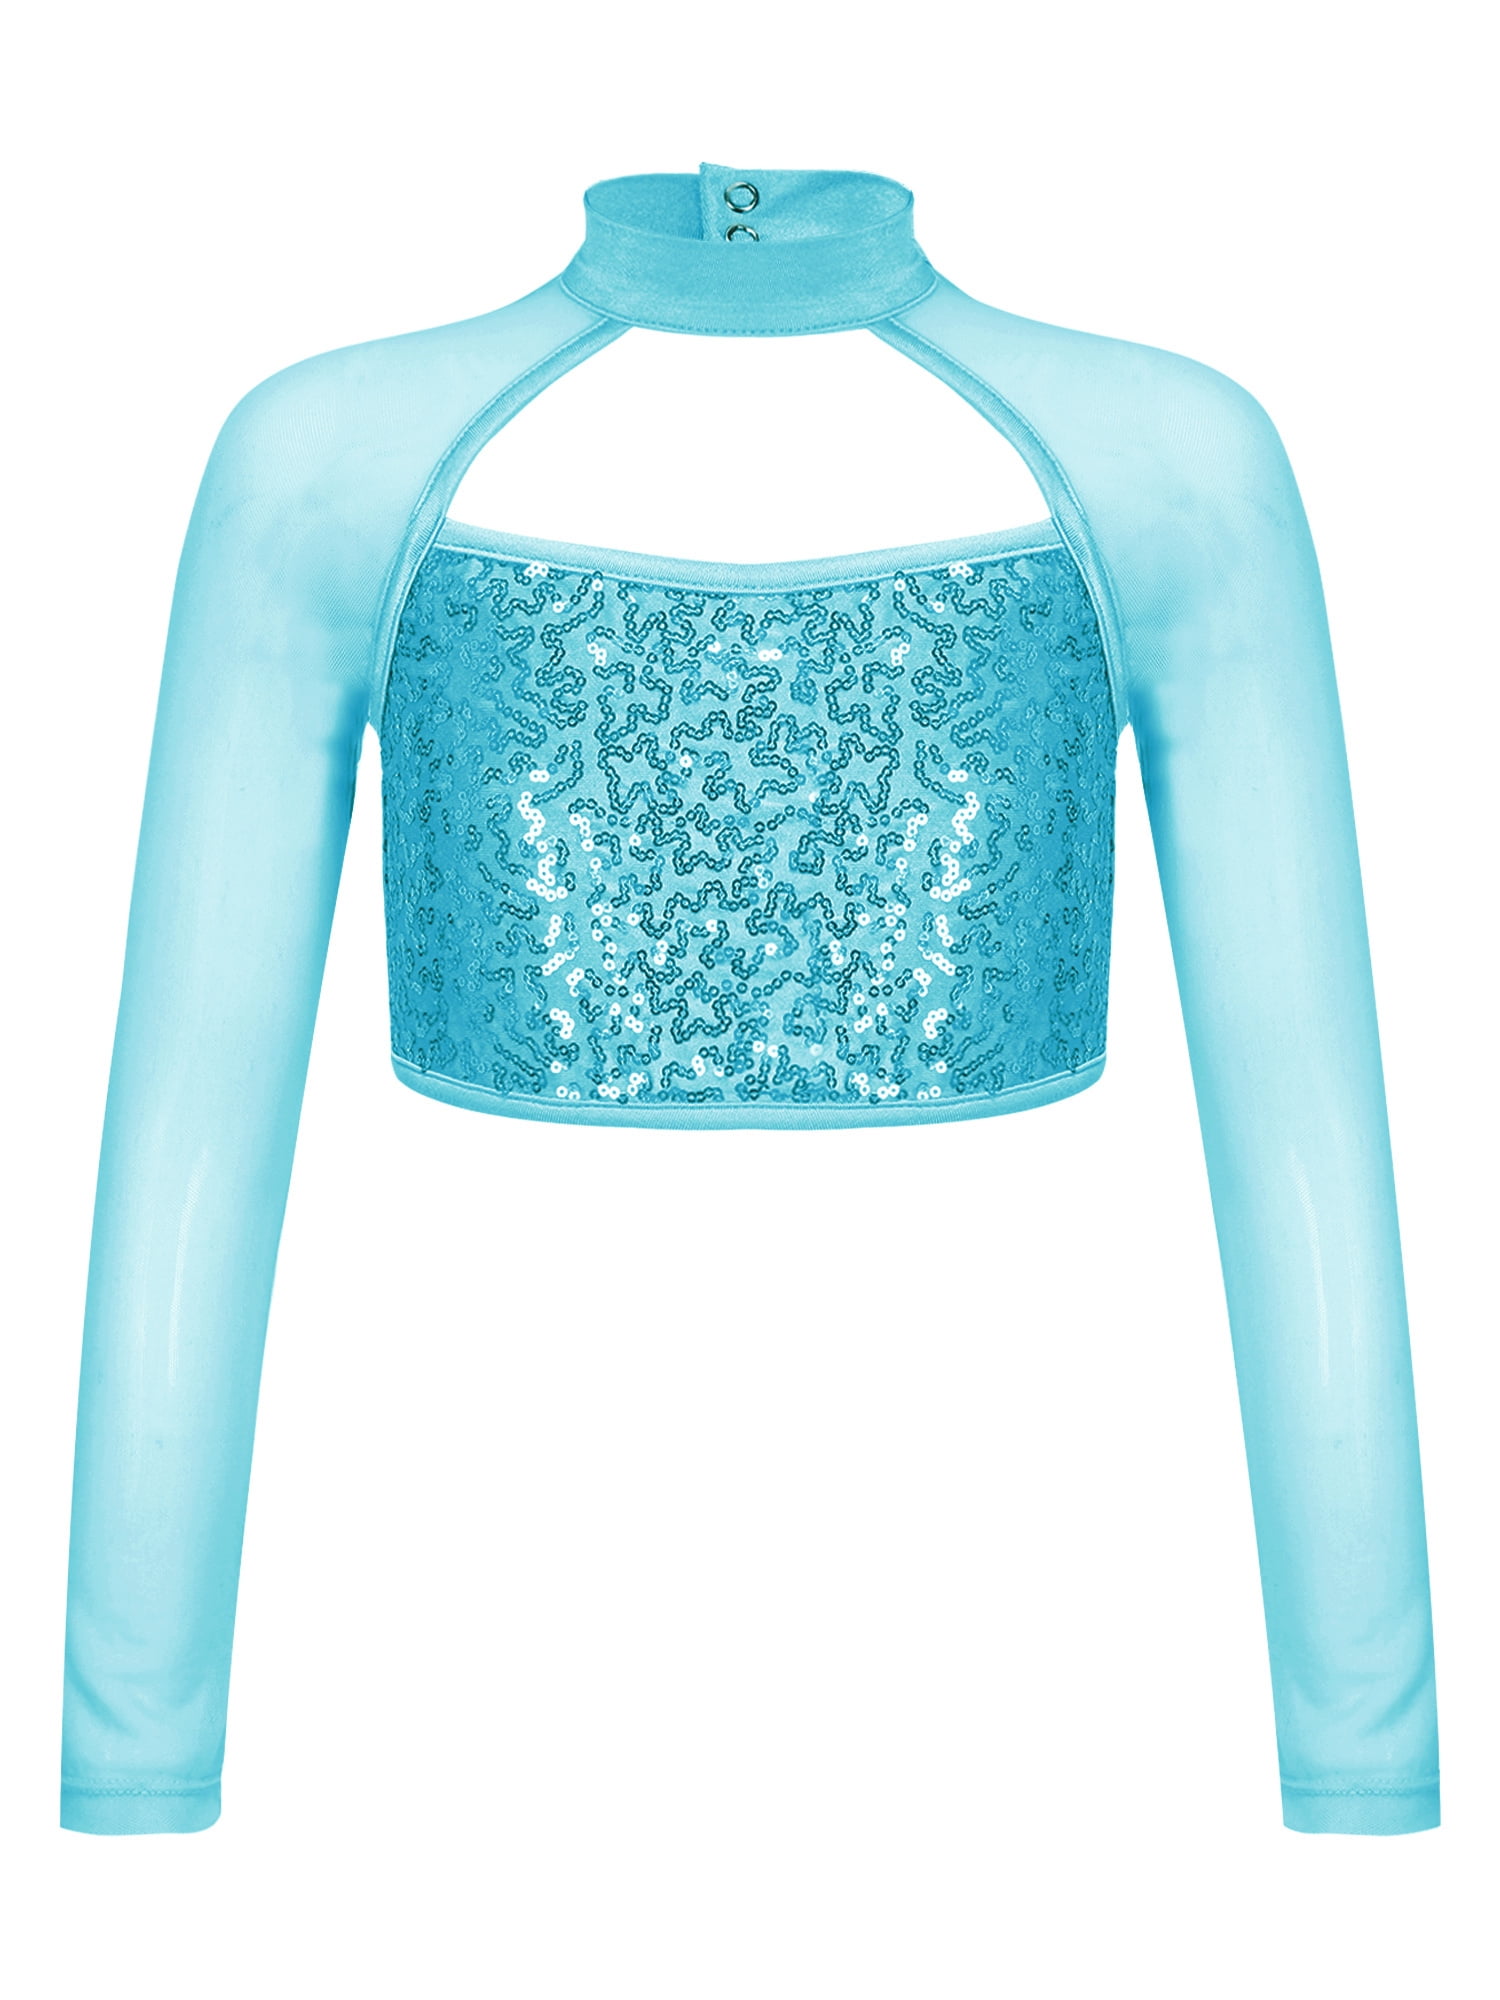 CHICTRY Shiny Sequins Crop Top for Girls Long Sleeve Ballet Modern ...